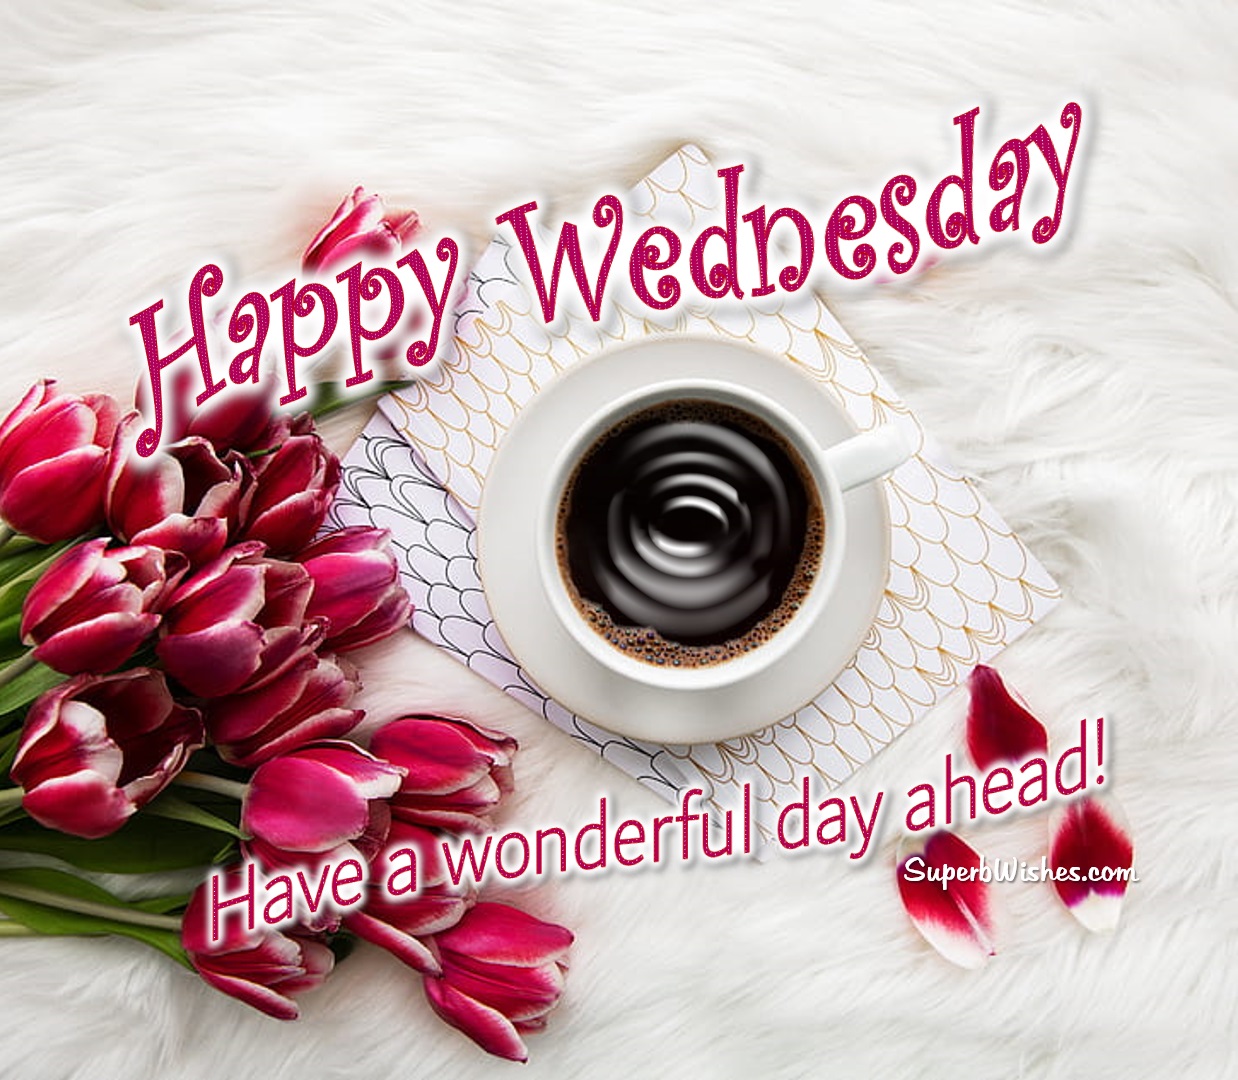 Happy Wednesday Images - Have A Wonderful Day Ahead! | SuperbWishes